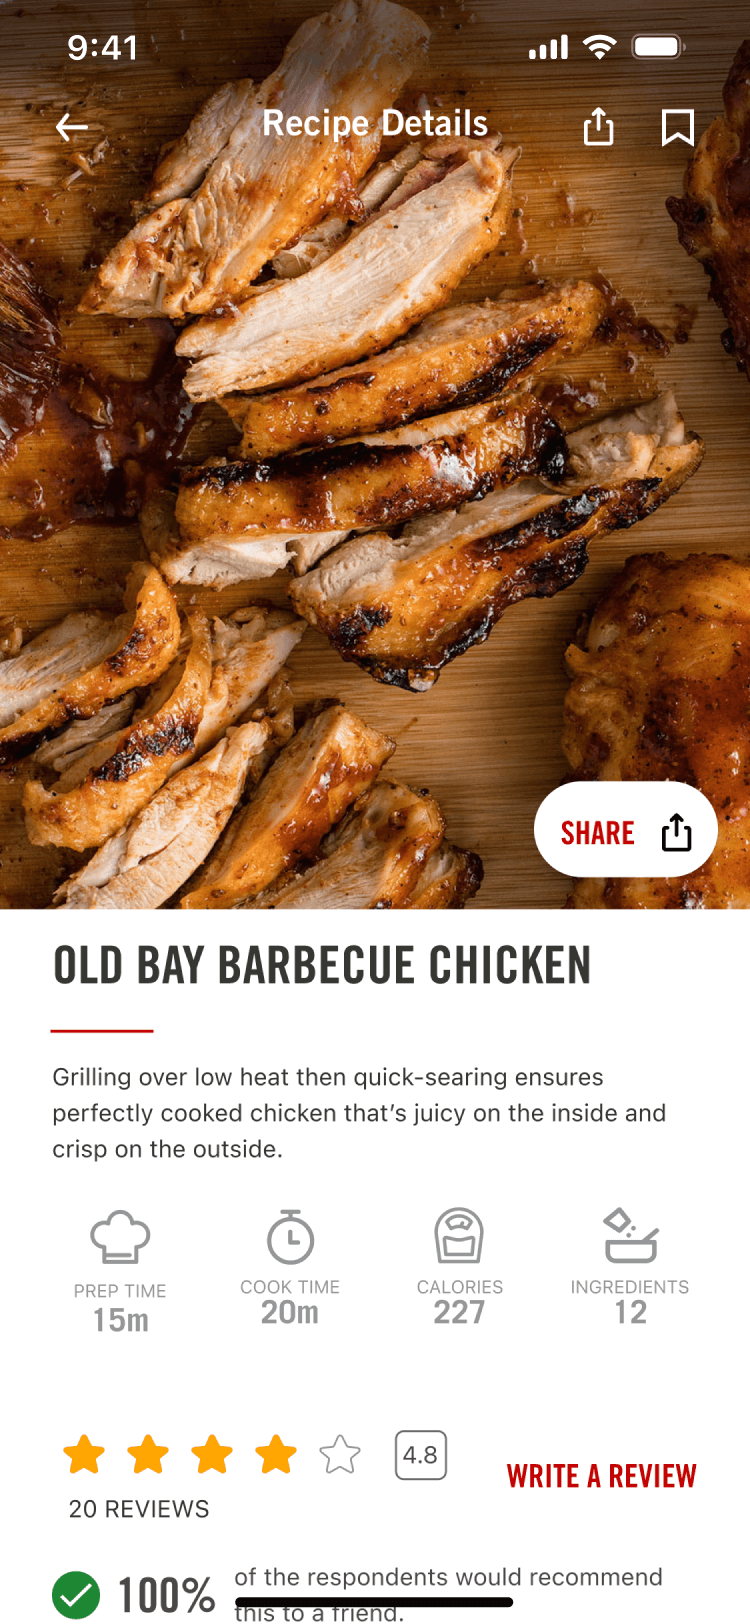 A smartphone screen showing a recipe for Old Bay Barbecue Chicken with an image of cooked chicken on the McCormick app. The recipe includes star ratings, prep and cook time, calories per serving, and a 'Save Recipe' button.